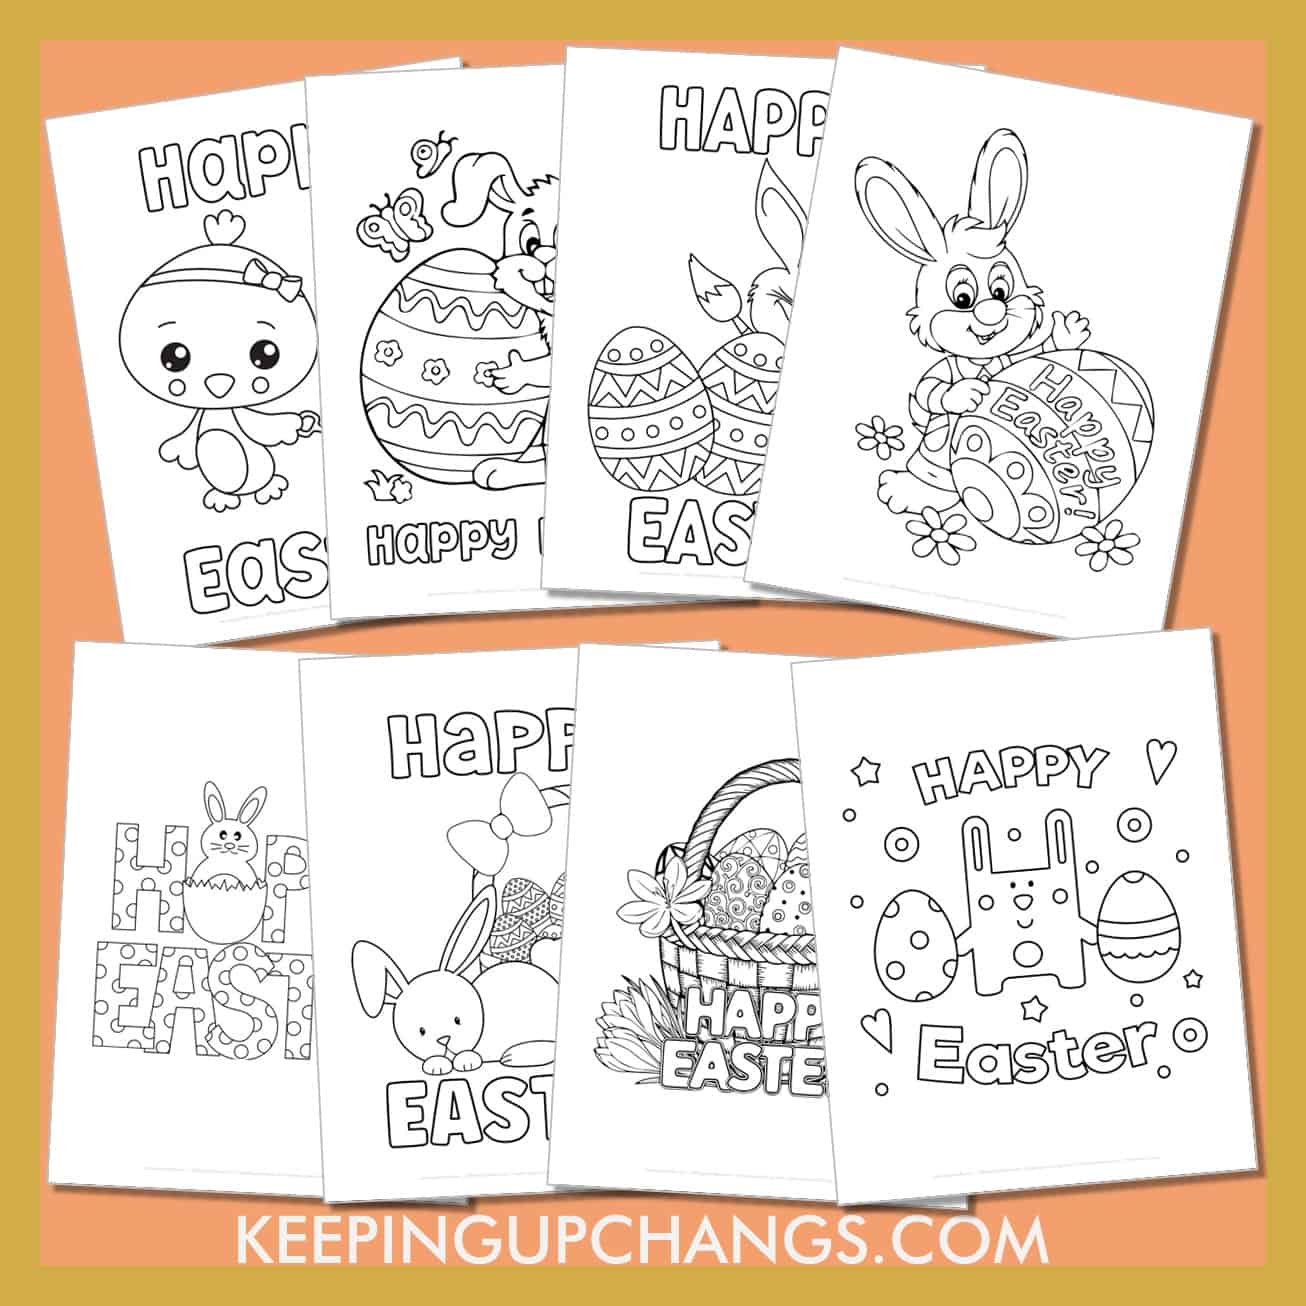 free happy easter pictures to color for toddlers, kids, adults.